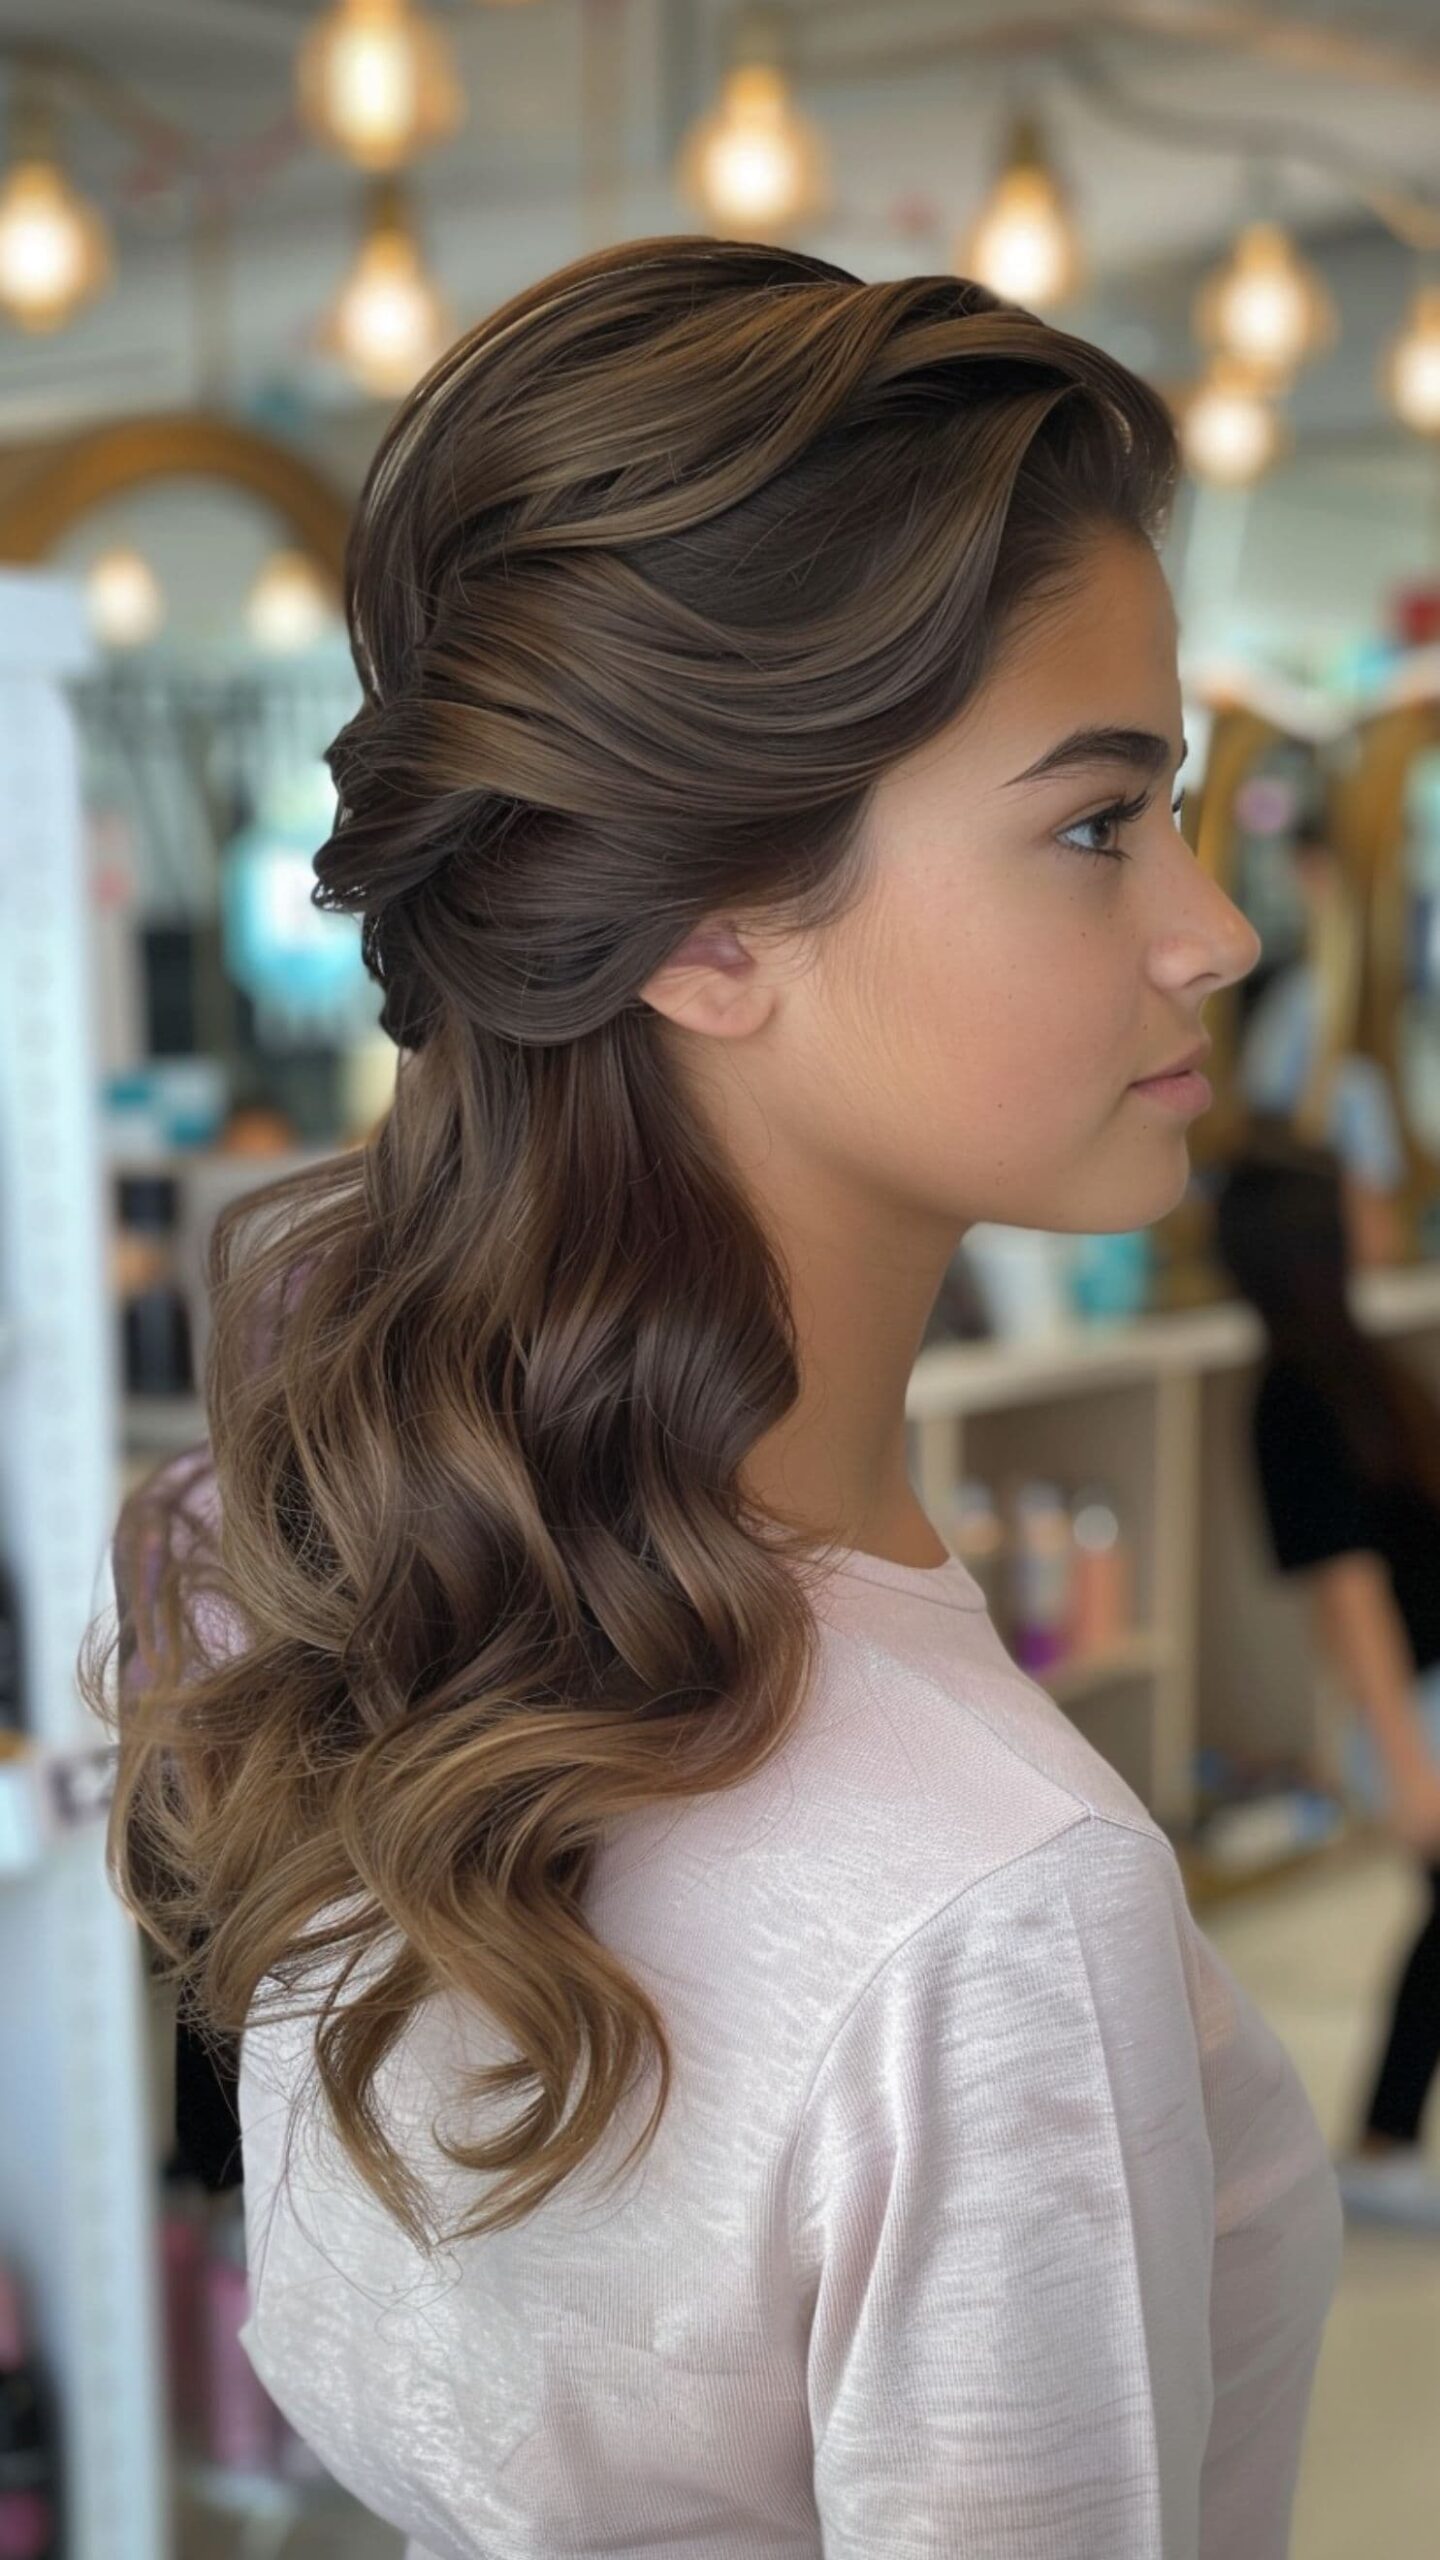 A woman modelling a half-pinned updo with waves hairstyle.